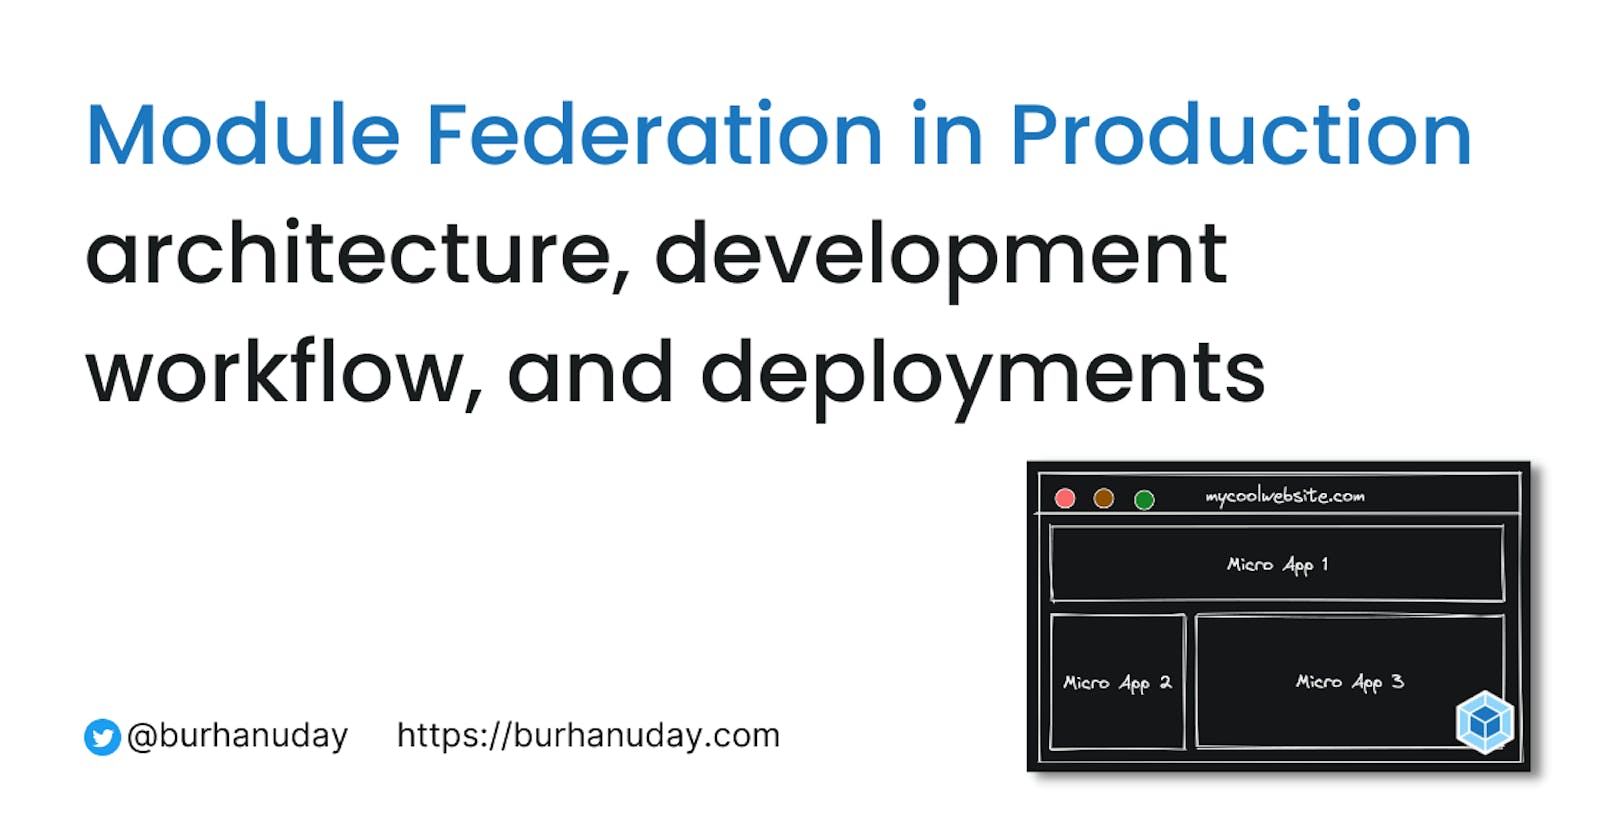 Module Federation in Production: architecture, development workflow, and deployments